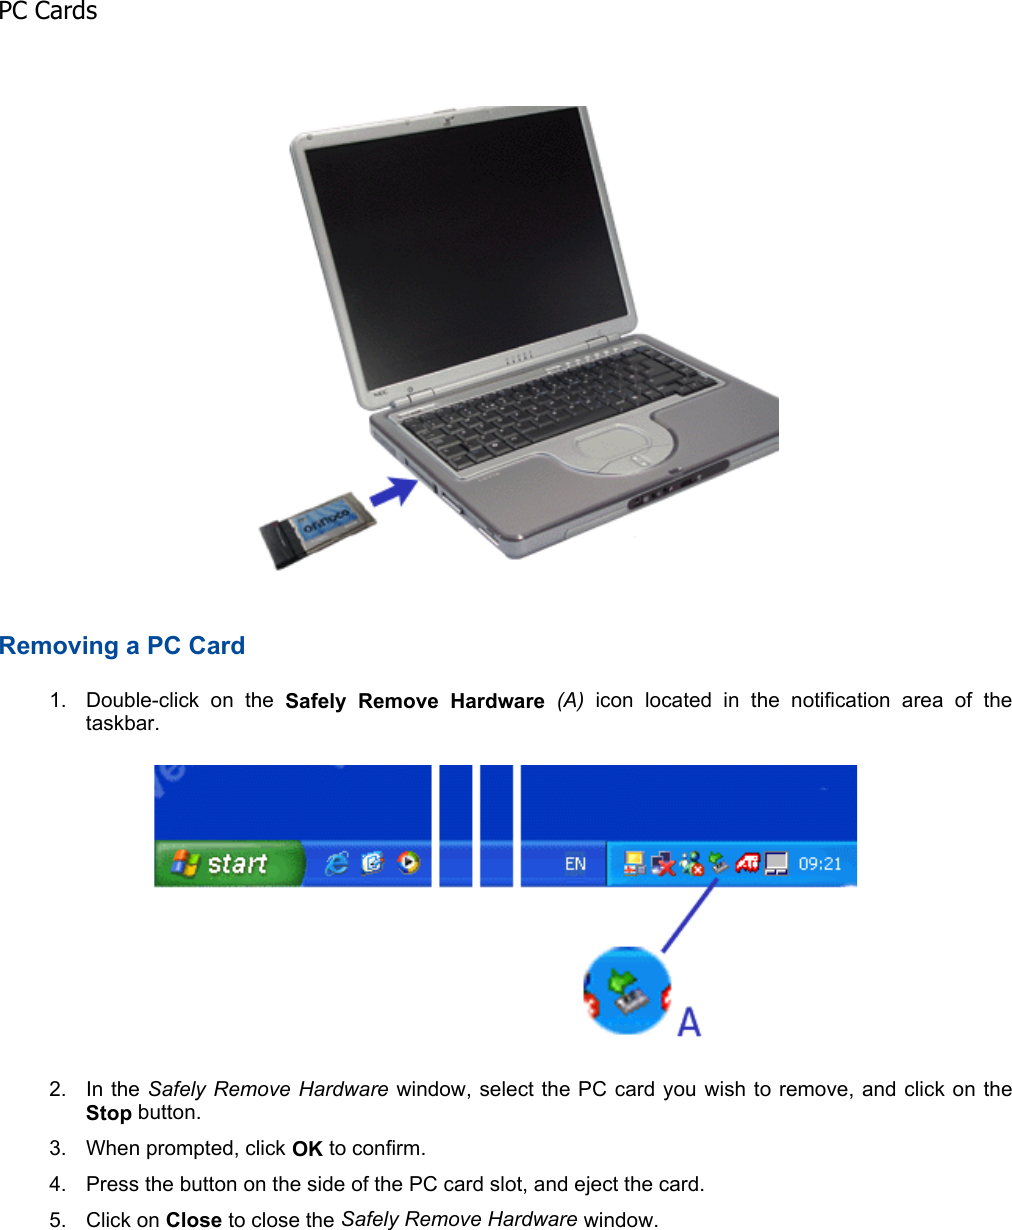 Removing a PC Card 1. Double-click on the Safely Remove Hardware (A) icon located in the notification area of the taskbar. 2. In the Safely Remove Hardware window, select the PC card you wish to remove, and click on theStop button. 3. When prompted, click OK to confirm. 4. Press the button on the side of the PC card slot, and eject the card. 5. Click on Close to close the Safely Remove Hardware window.    PC Cards